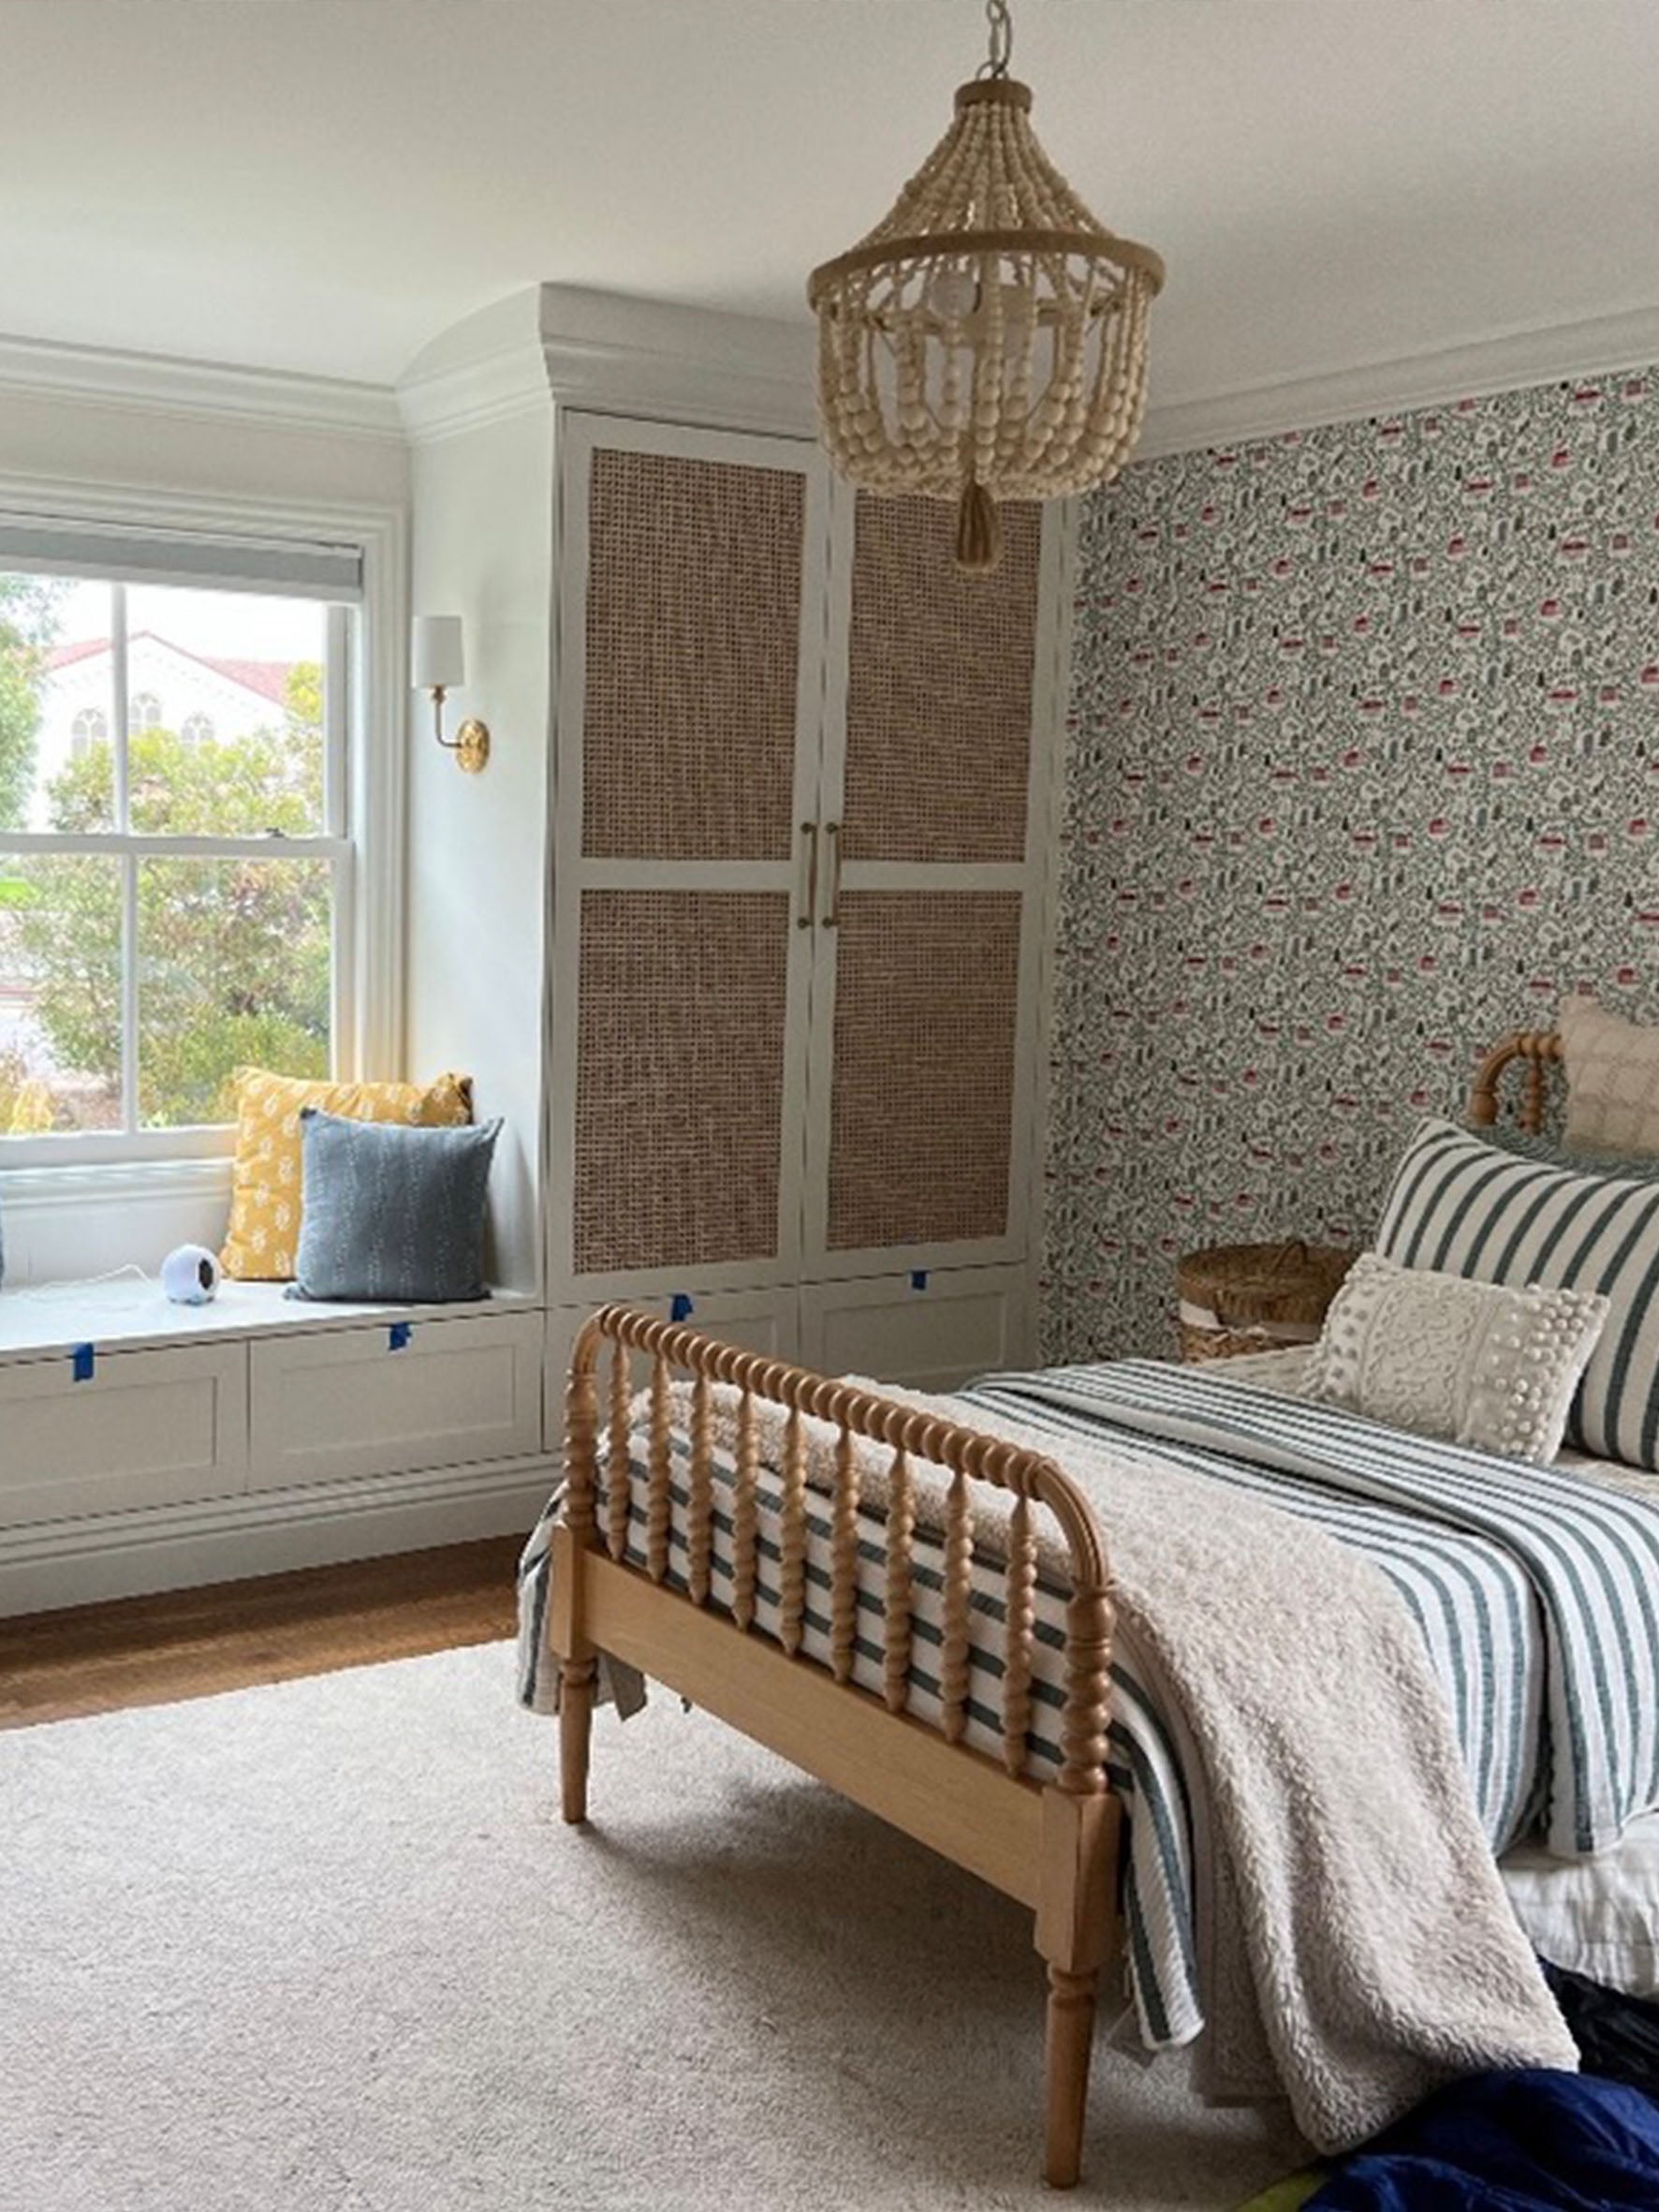 Girls bedroom with English Country Cottages wallpaper, Crate and Barrel kids single bed, built in cupboards